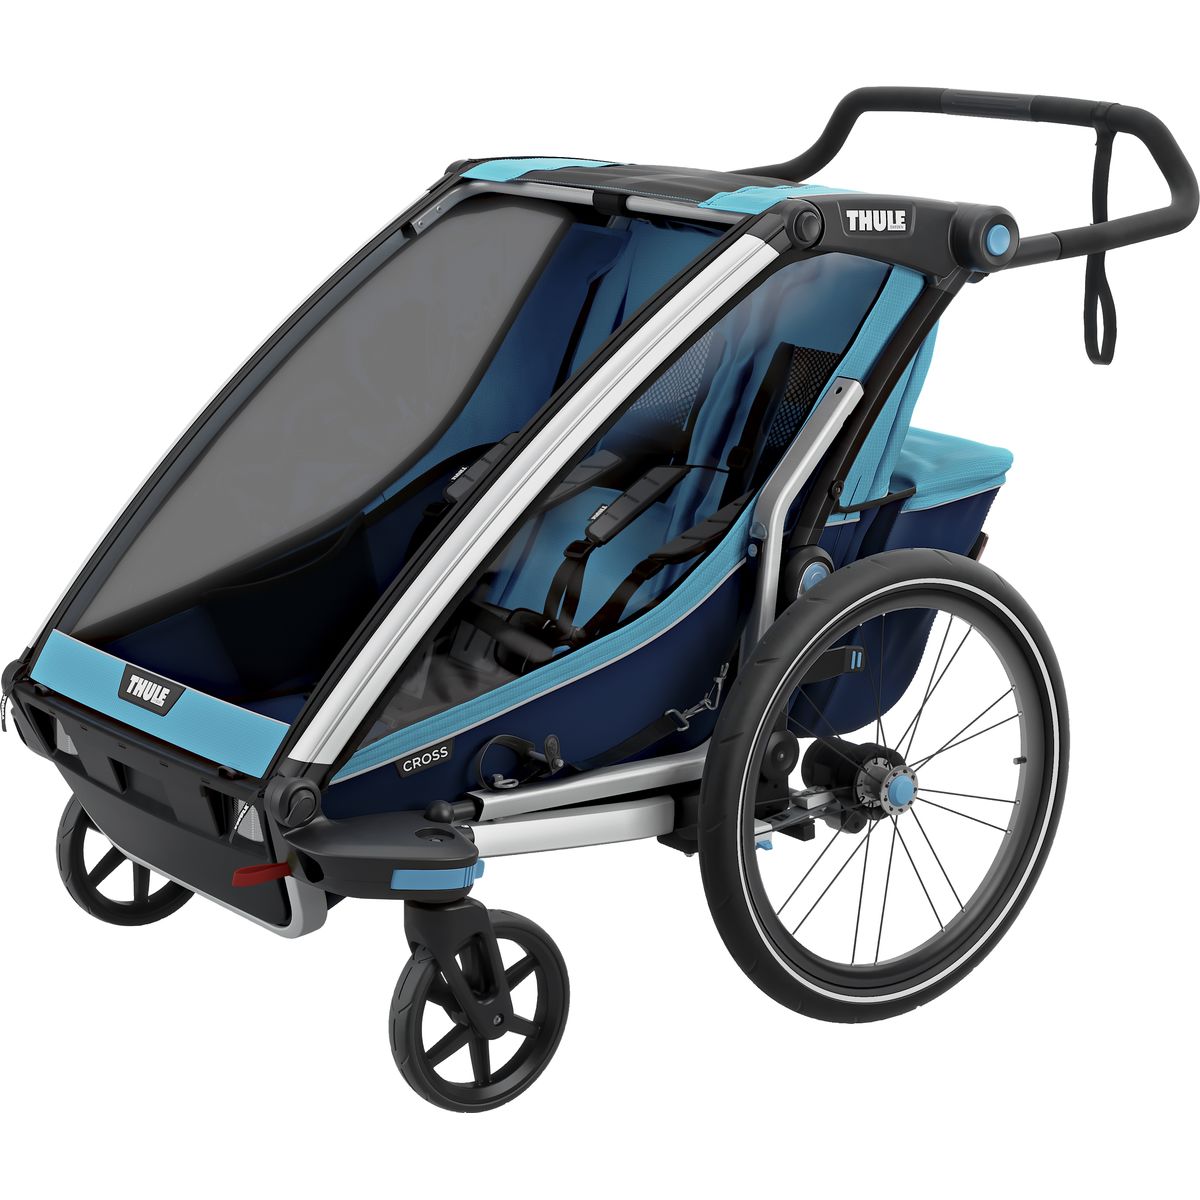 Thule Chariot Chariot Cross Stroller